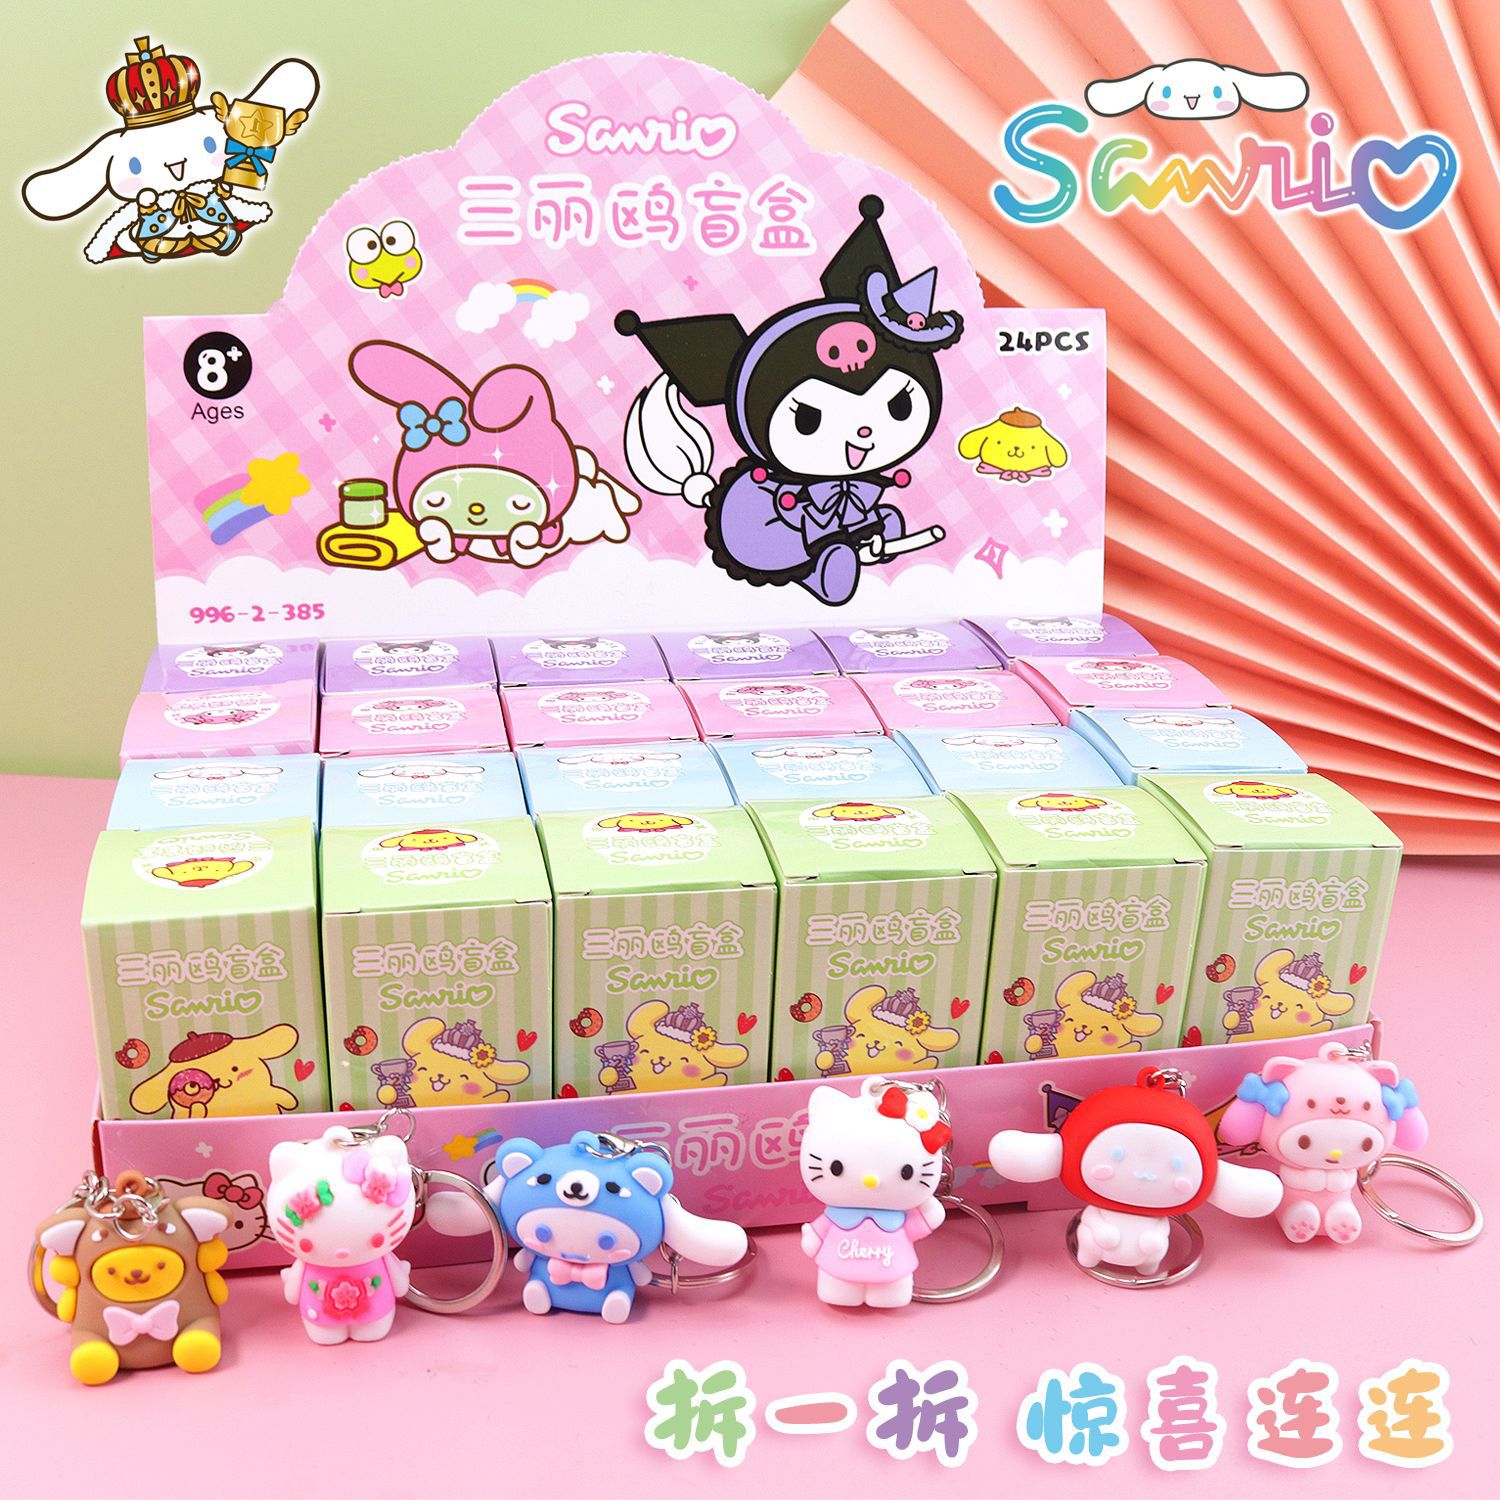 24 Boxes Sanrio Doll Blind Box Clow M Cute Internet Hot New School Prize Toys Wholesale Cheap and Easy to Sell